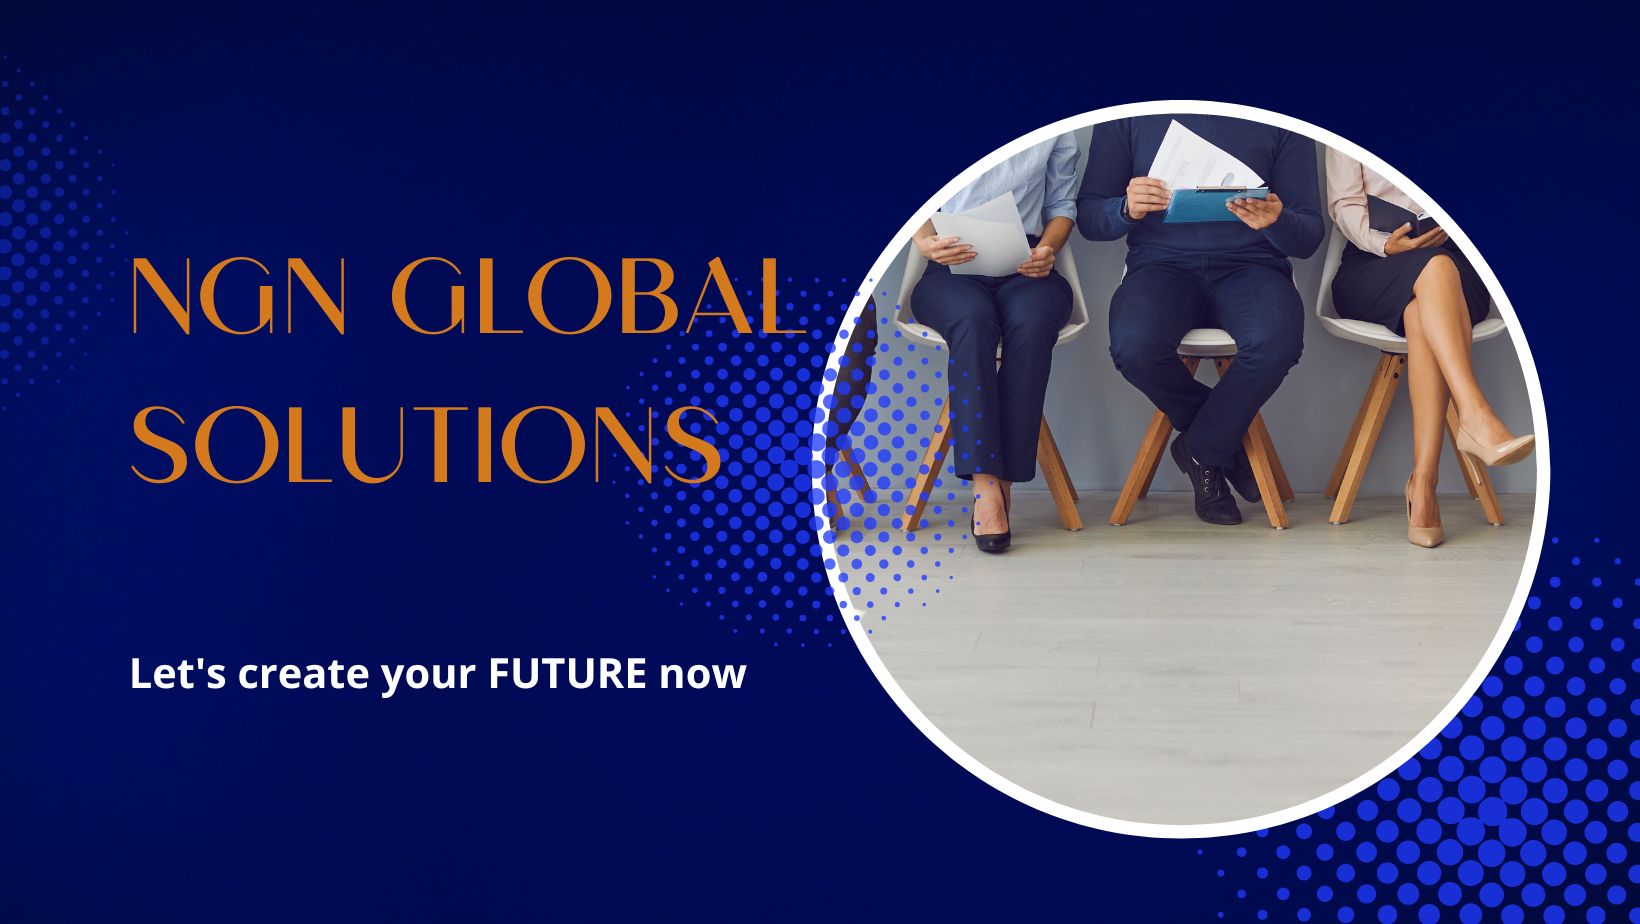 NGN Global Solutions homepage Let's create your future now